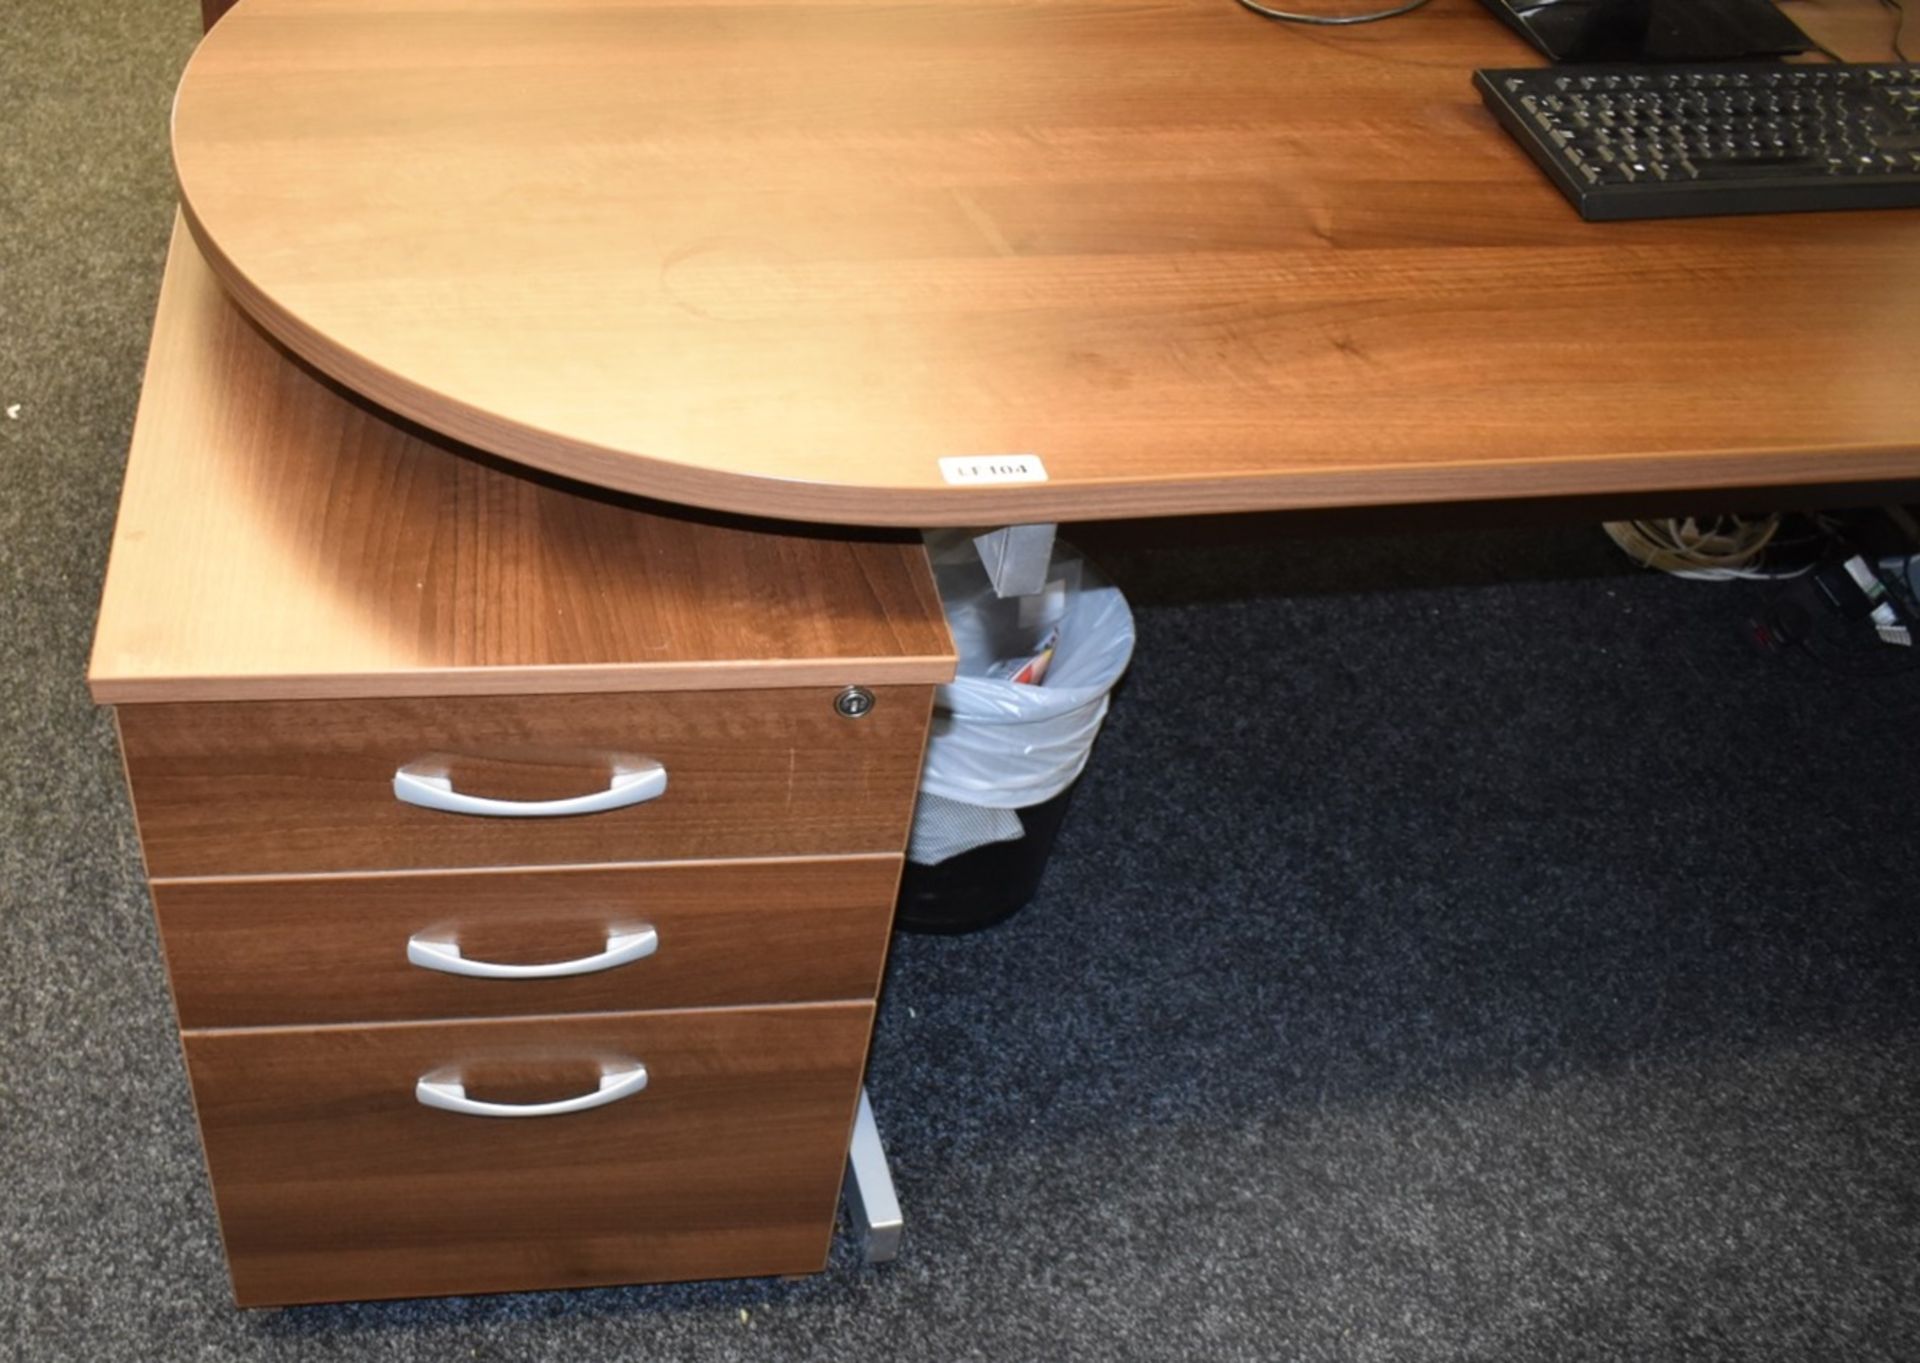 1 x Contemporary Office Desk - Features Semi Circle Meeting Point, Walnut Finish and Matching Drawer - Image 3 of 6